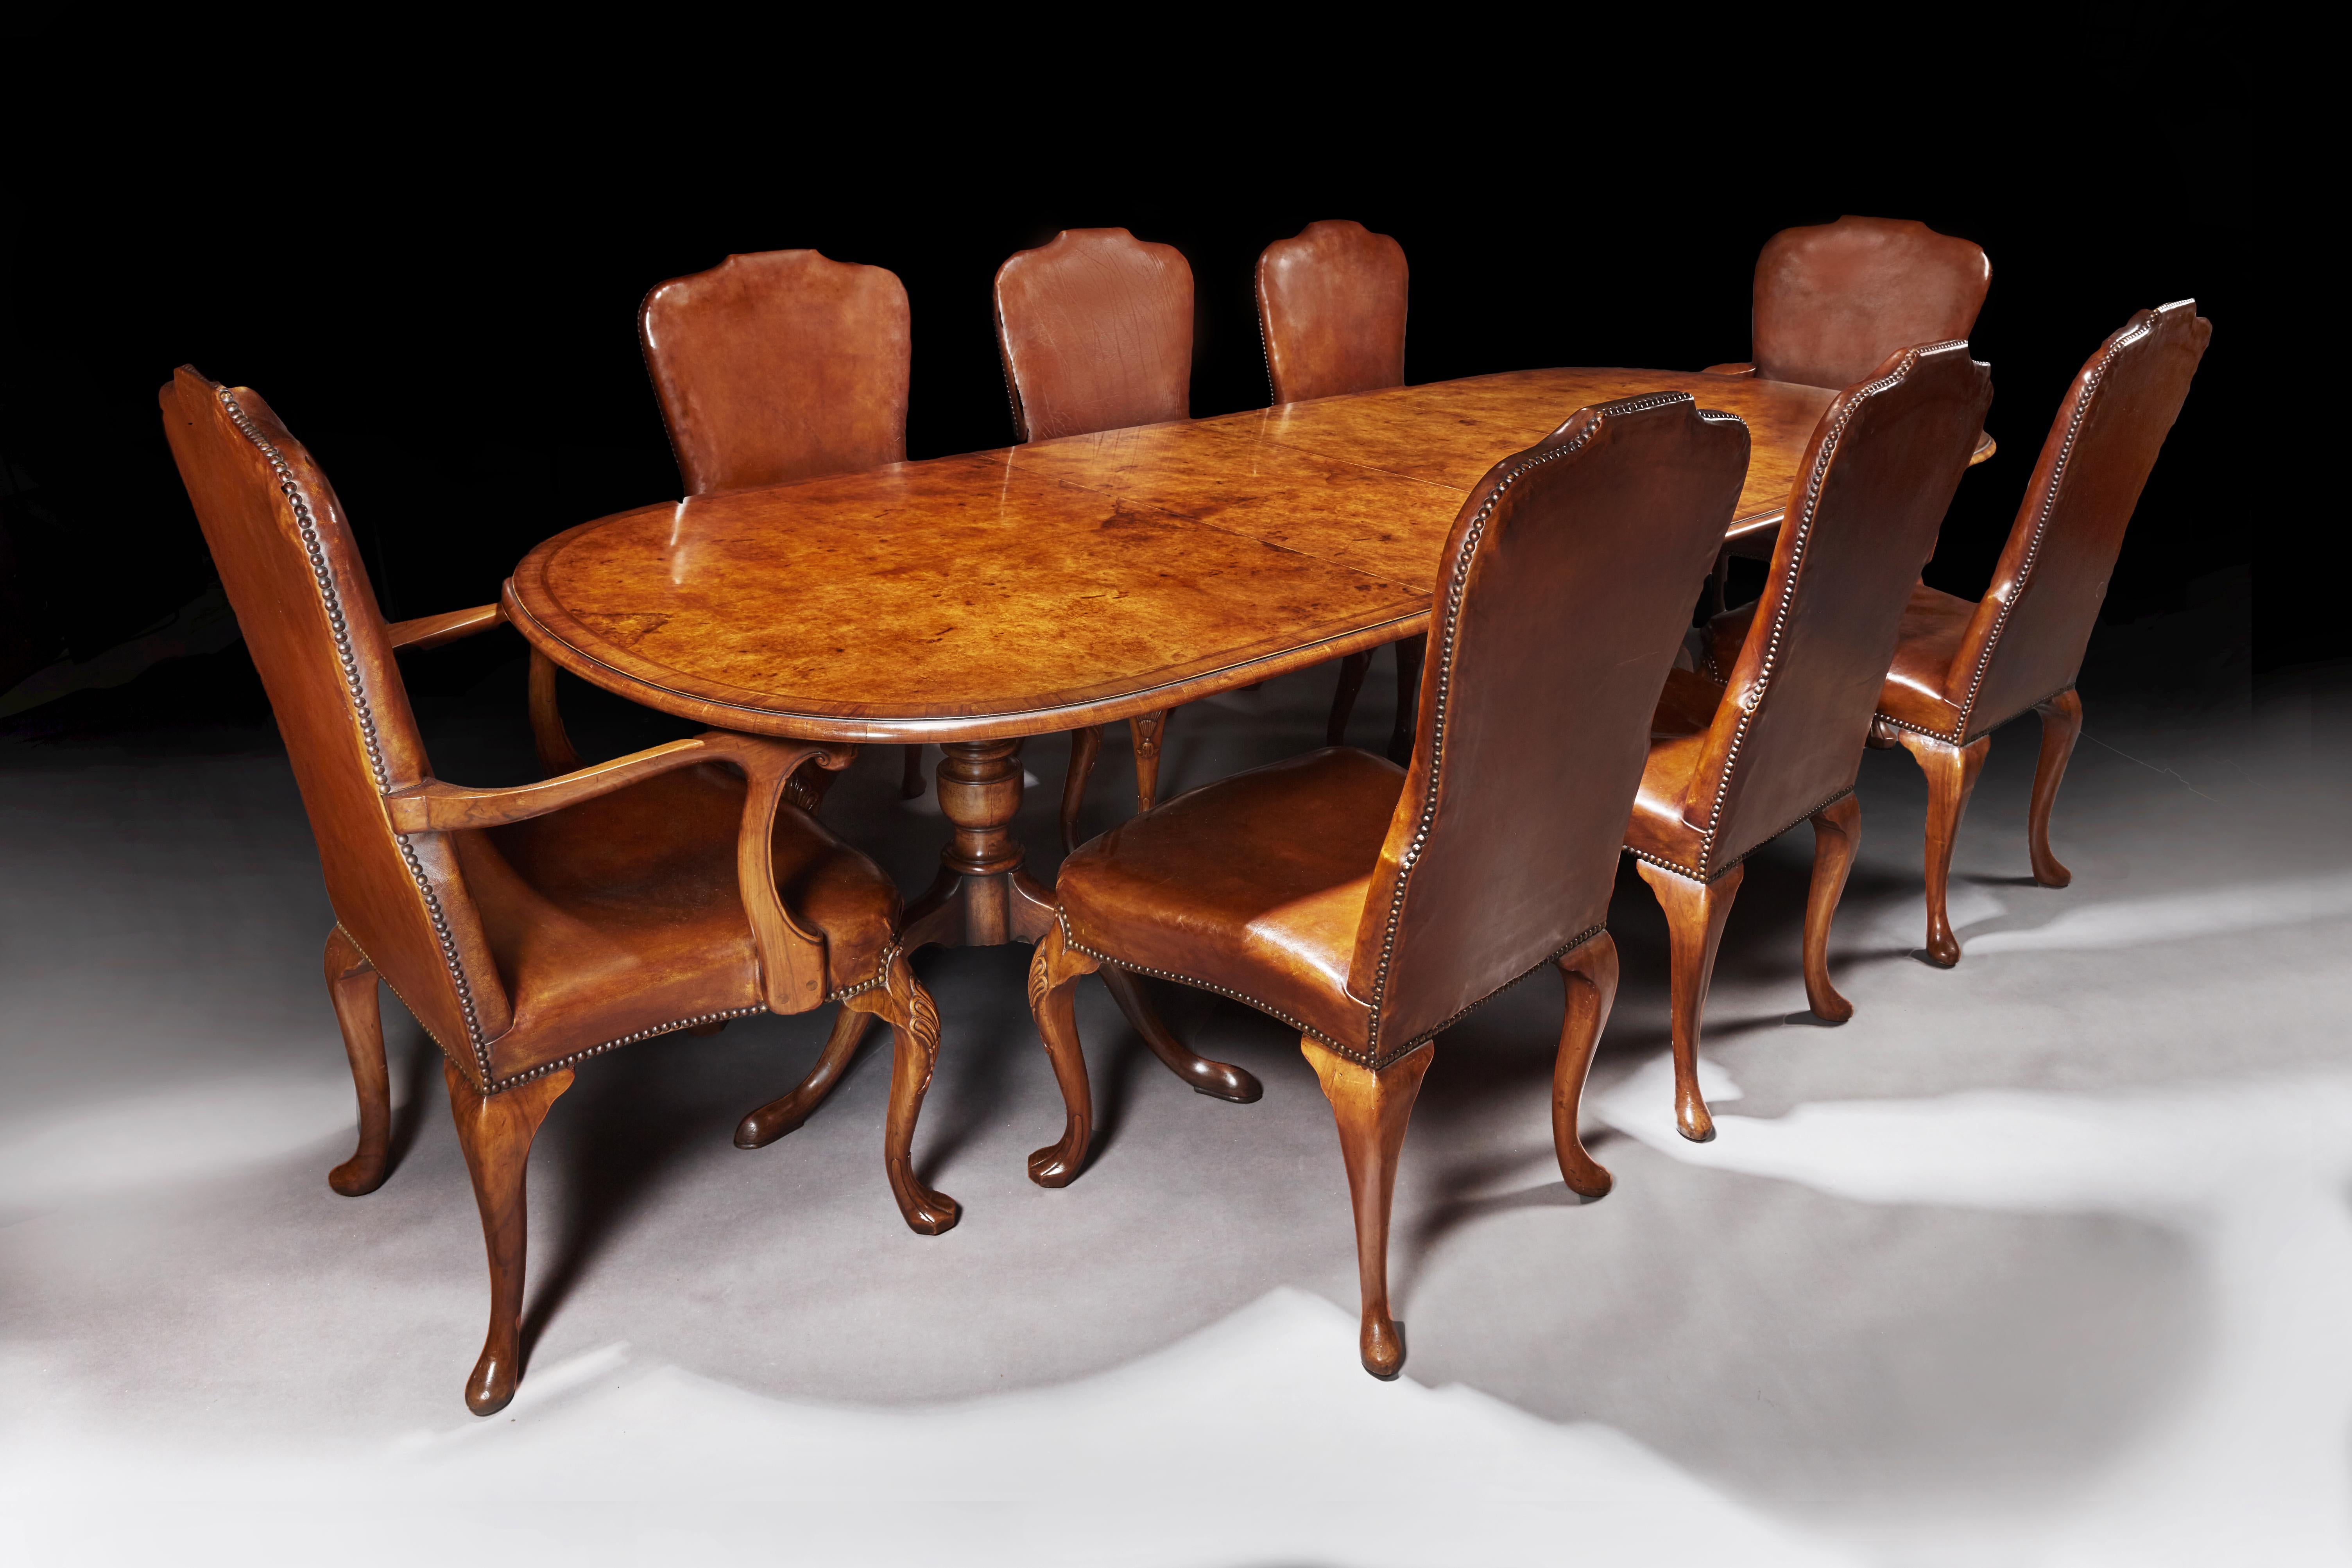 A very good quality antique early 20th century dining set comprising of an burr walnut extending pedestal dining circa 1920-1930 and a set of 8 (6 & 2) walnut leather upholstered dining chairs, circa 1910.

English circa, early 20th